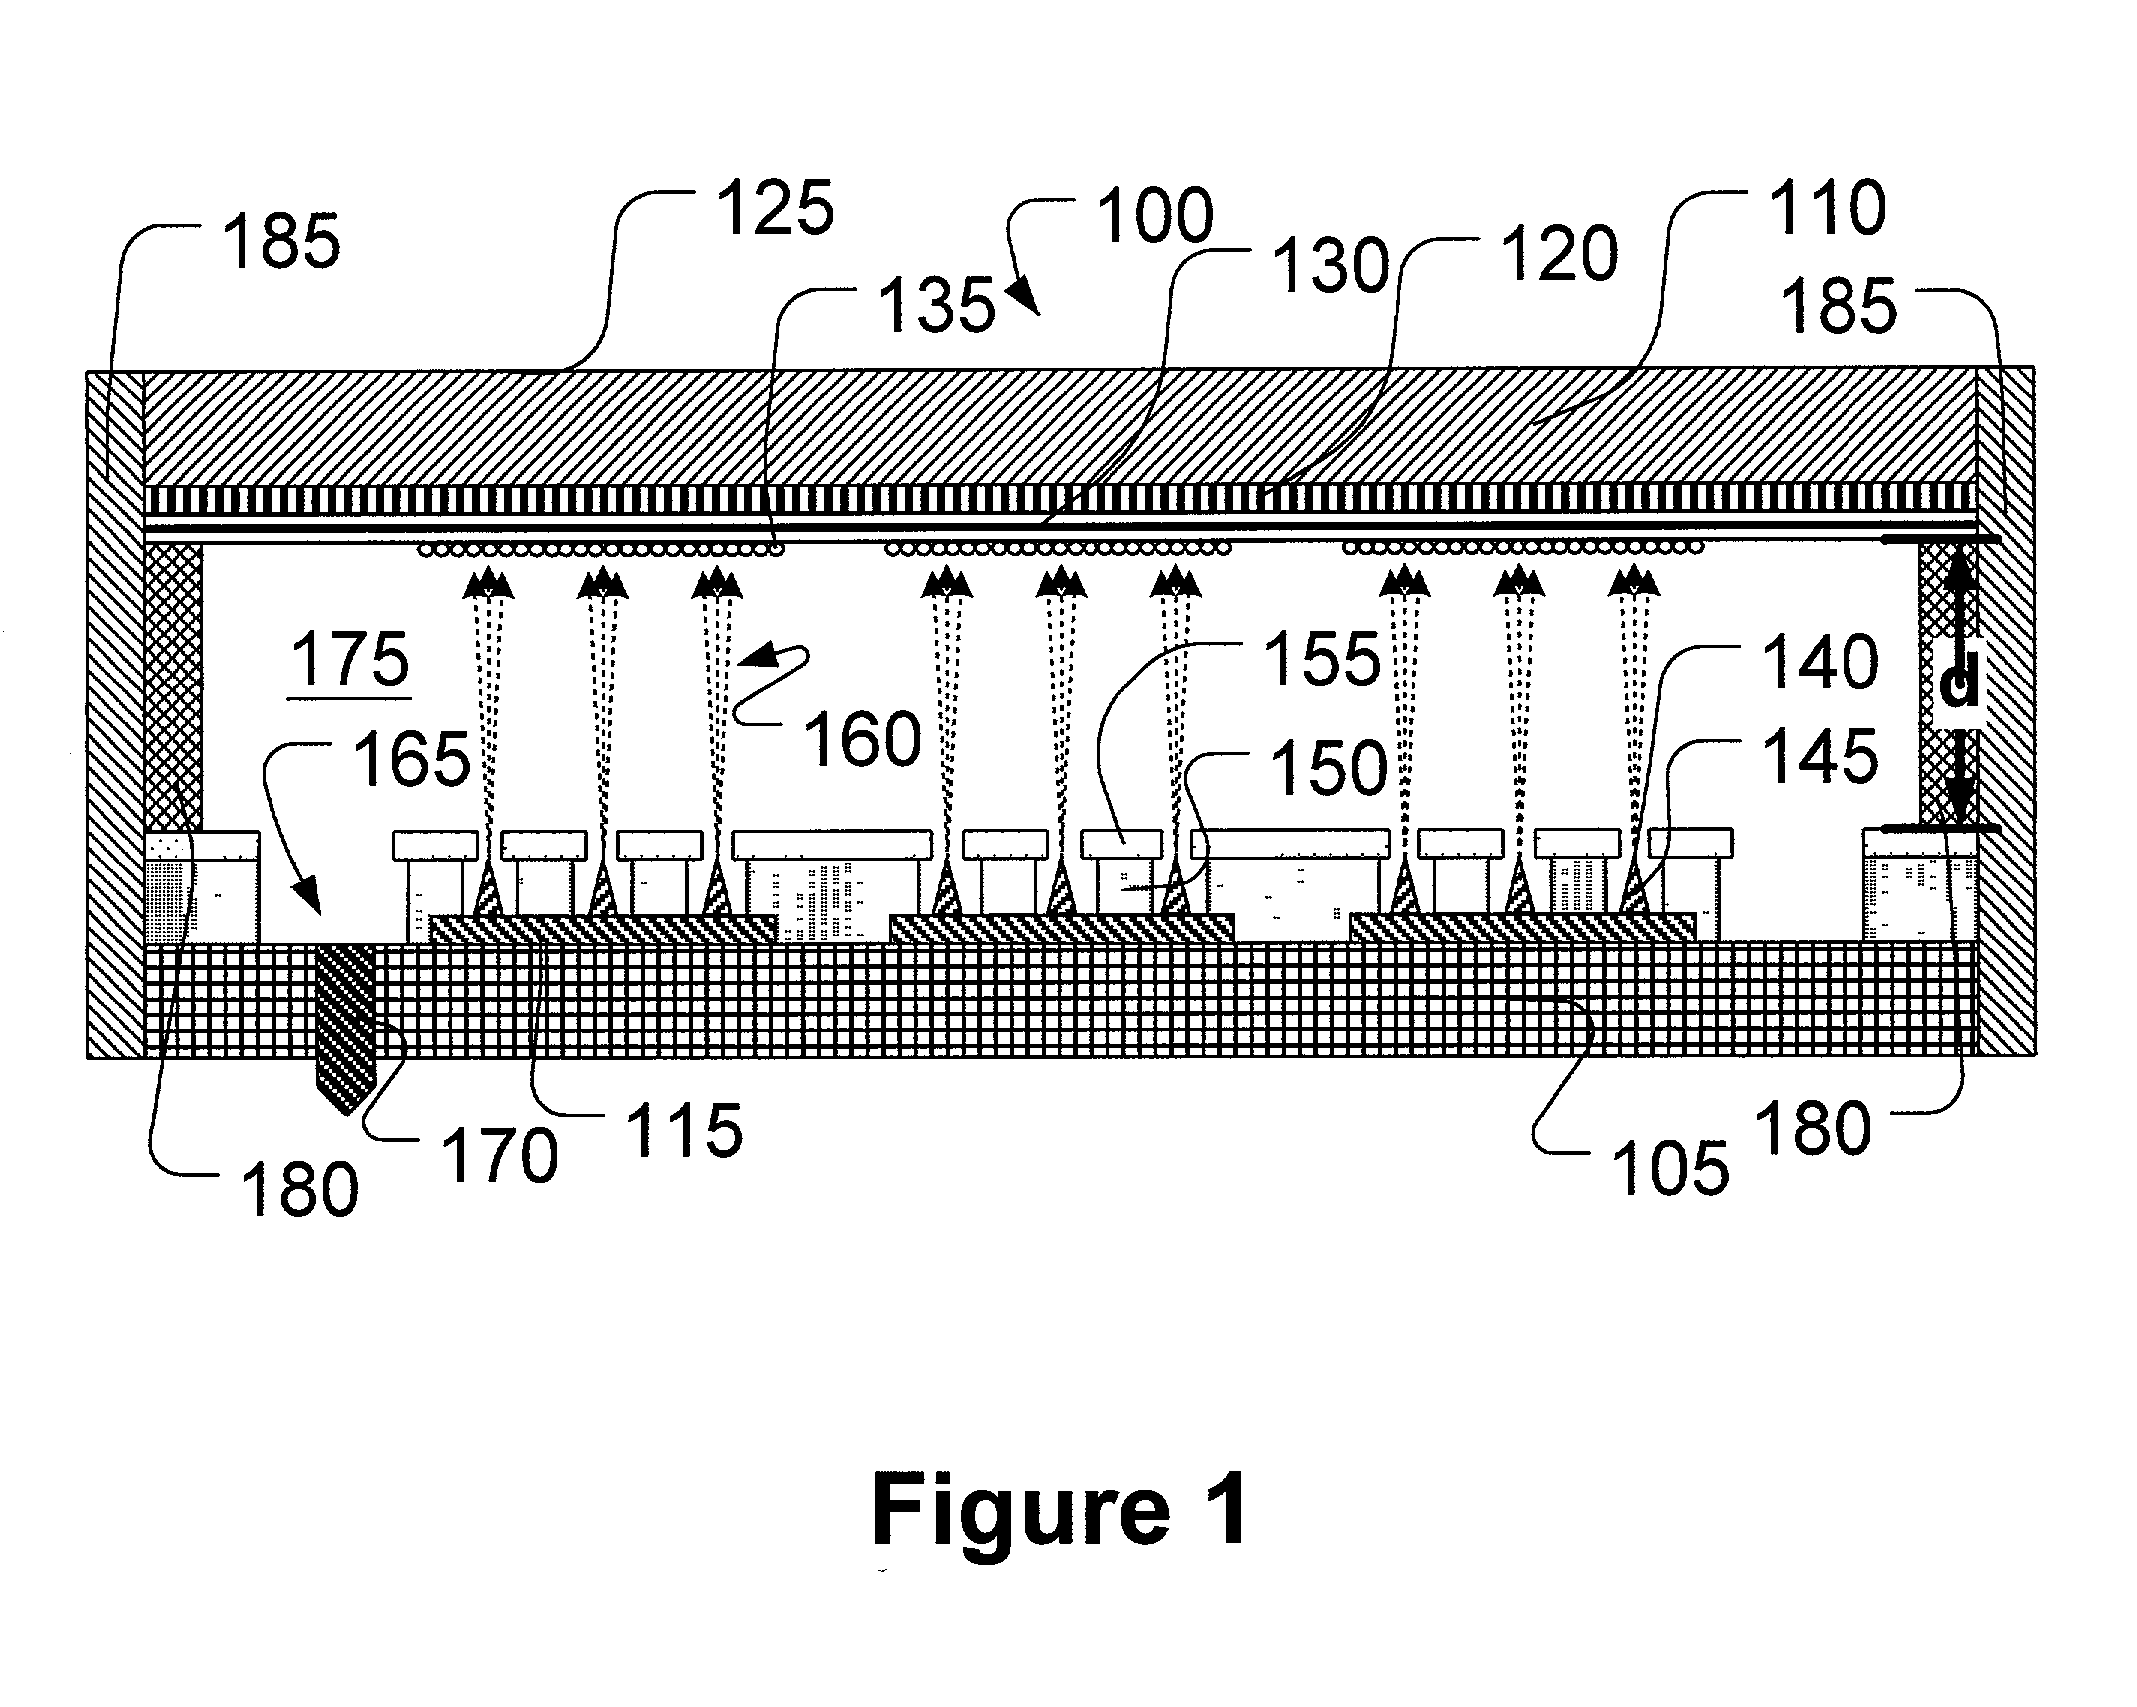 Method for using field emitter arrays in chemical and biological hazard mitigation and remediation